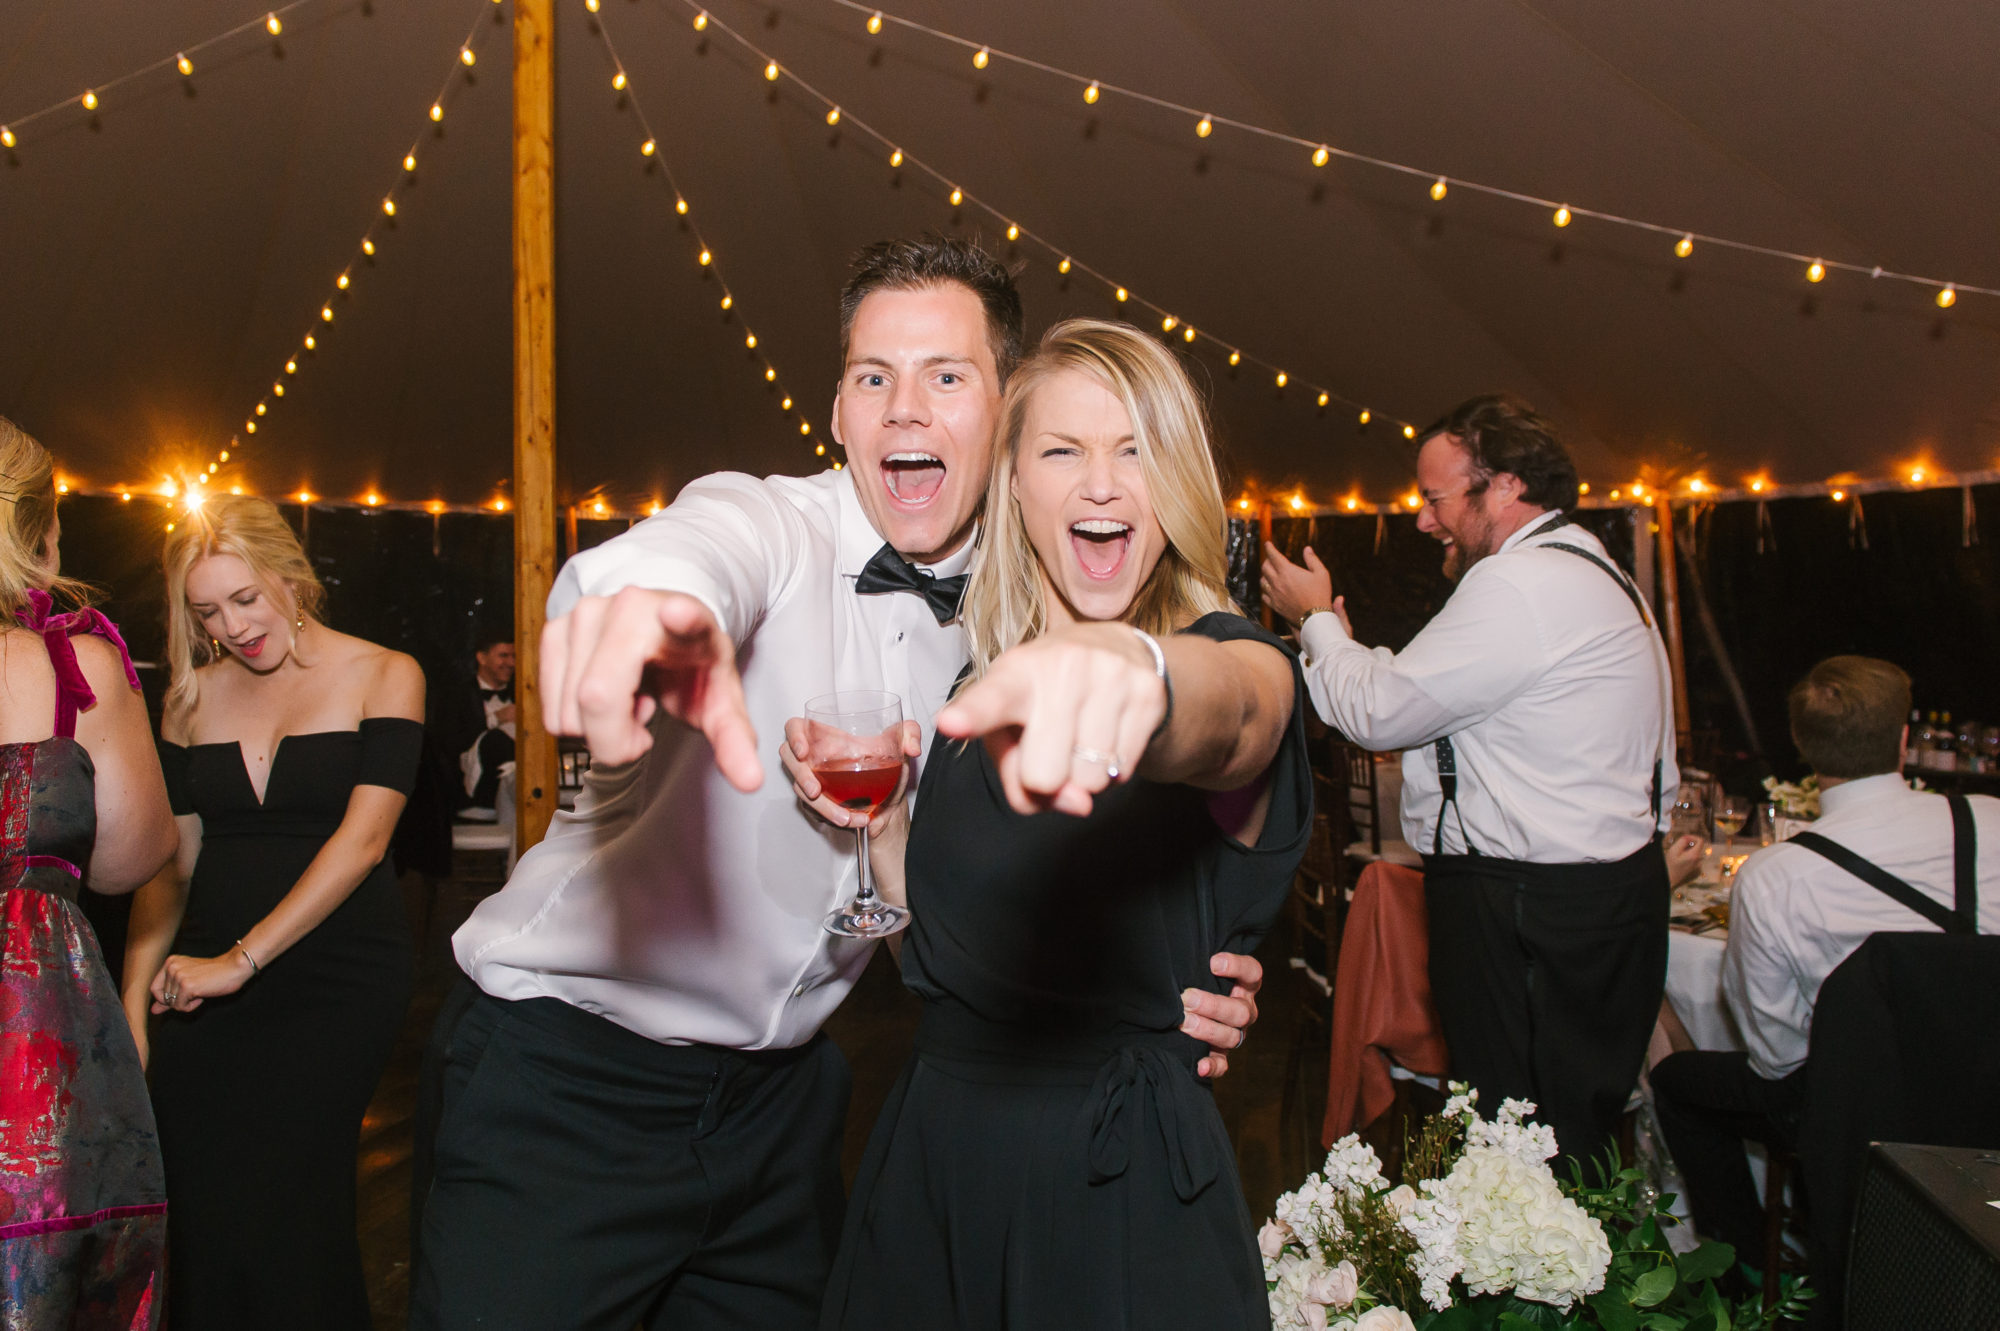 Wedding Photography Tips: How to Take Gorgeous Indoor Wedding Photos by popular New England photographer, Shannon Shipman: image of a man and a woman smiling and pointing at the camera. 